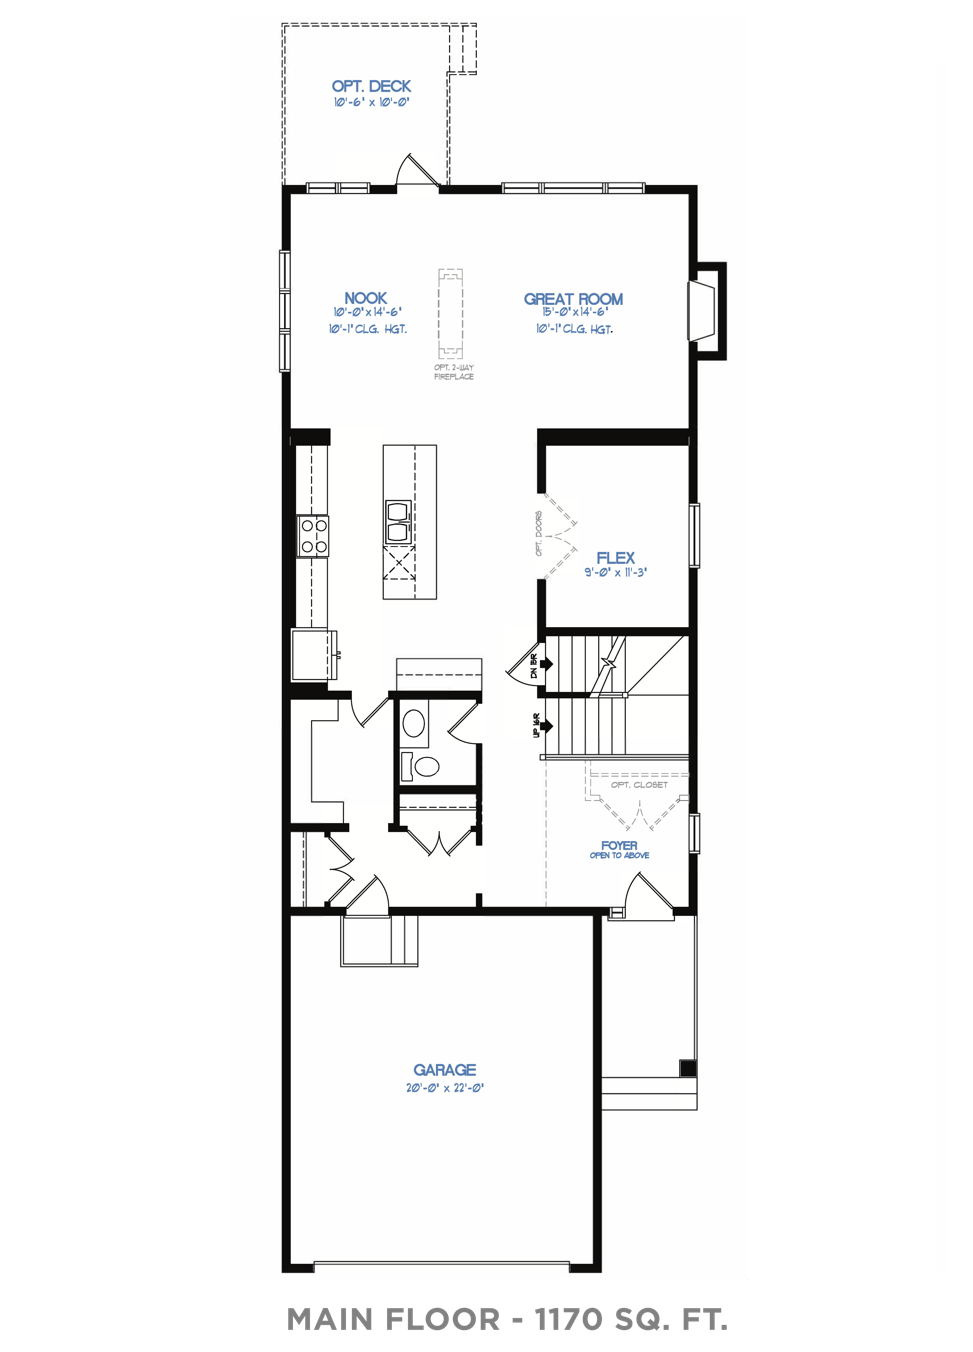 Show Stopping Showhomes: The Tallyn Main Floor Plan Image